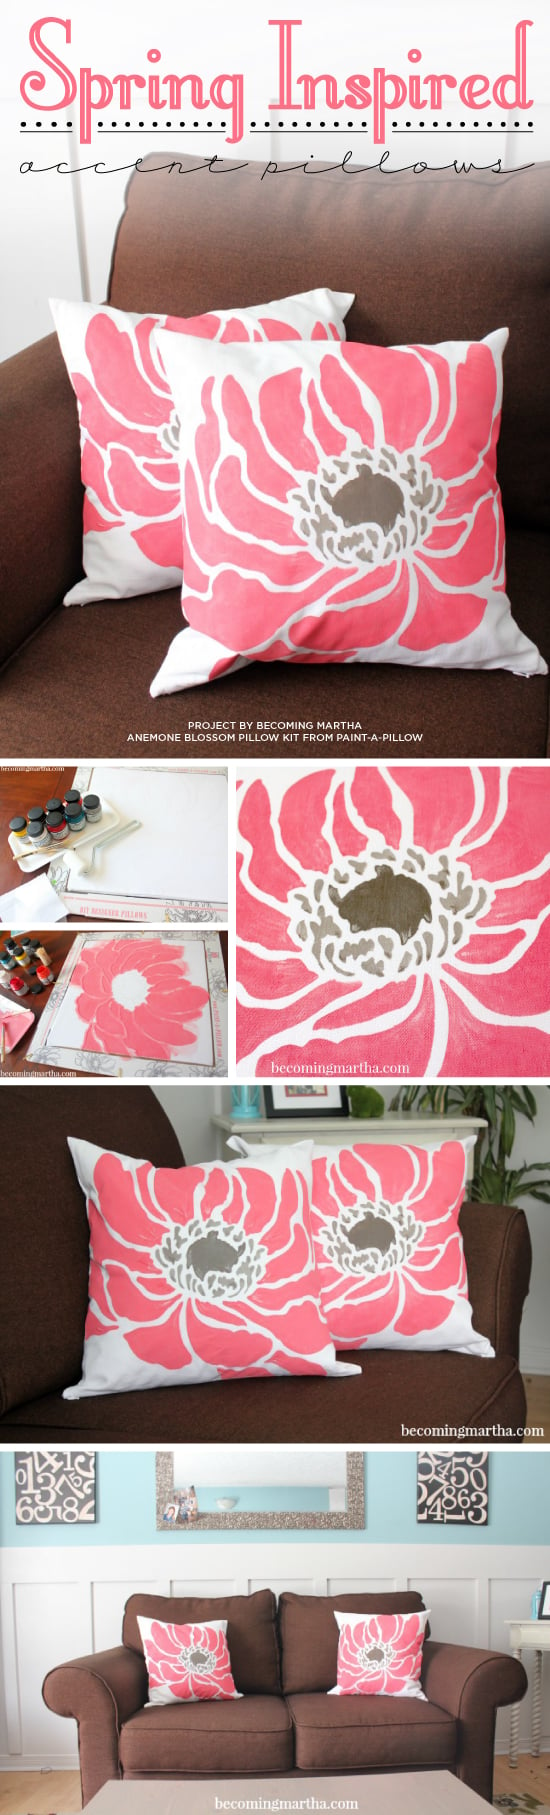 Cutting Edge Stencils shares DIY spring inspired painted pillow using the Anemone Blossom stencil from Paint-A-Pillow. http://paintapillow.com/index.php/anemone-blossom-paint-a-pillow-kit.html